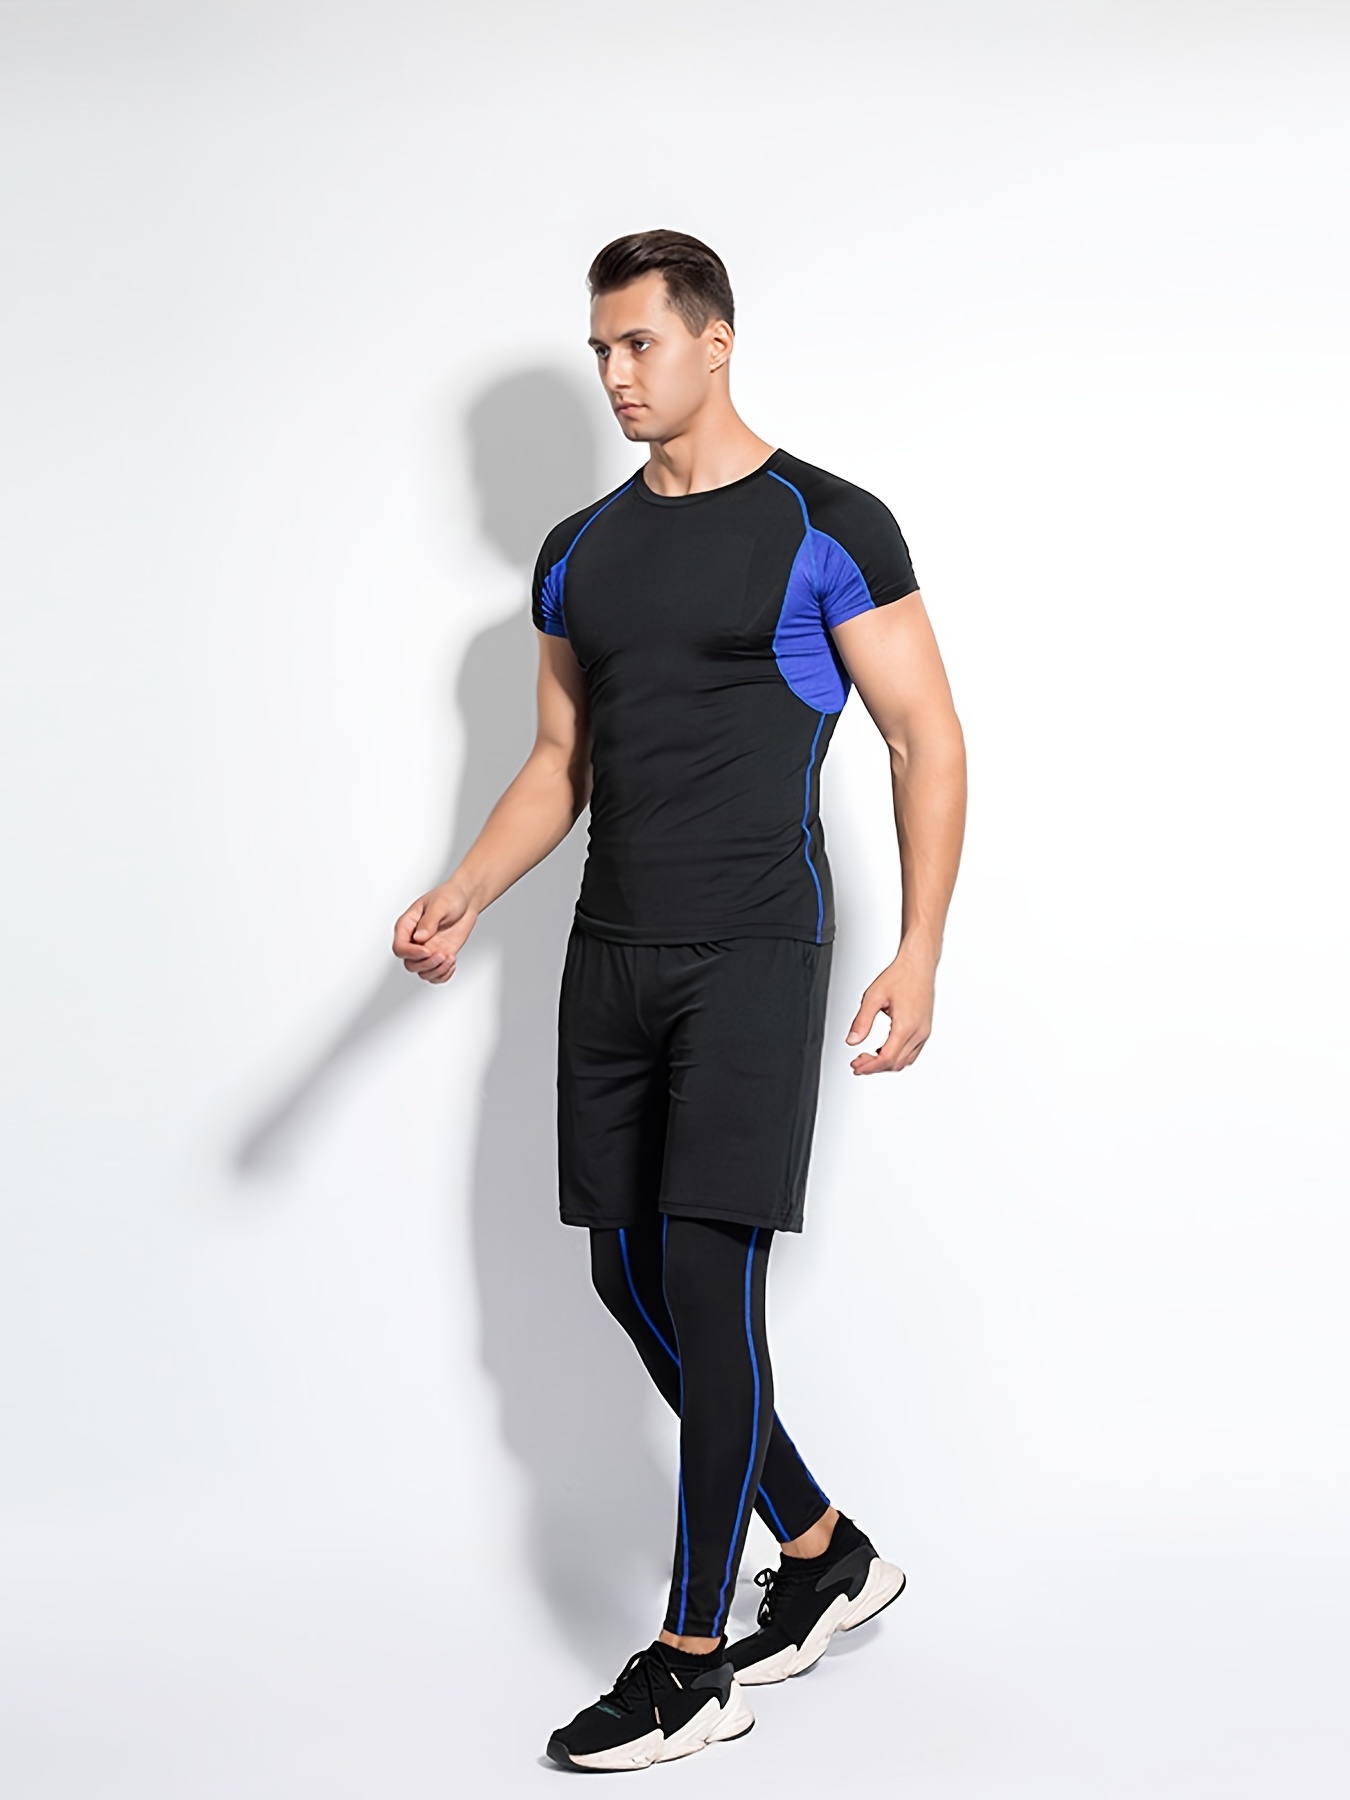 Men's 3-Piece Compression Suit Set: Slim Fit, Breathable, Quick Drying &  Sweat Absorbing For Sports & Fitness!